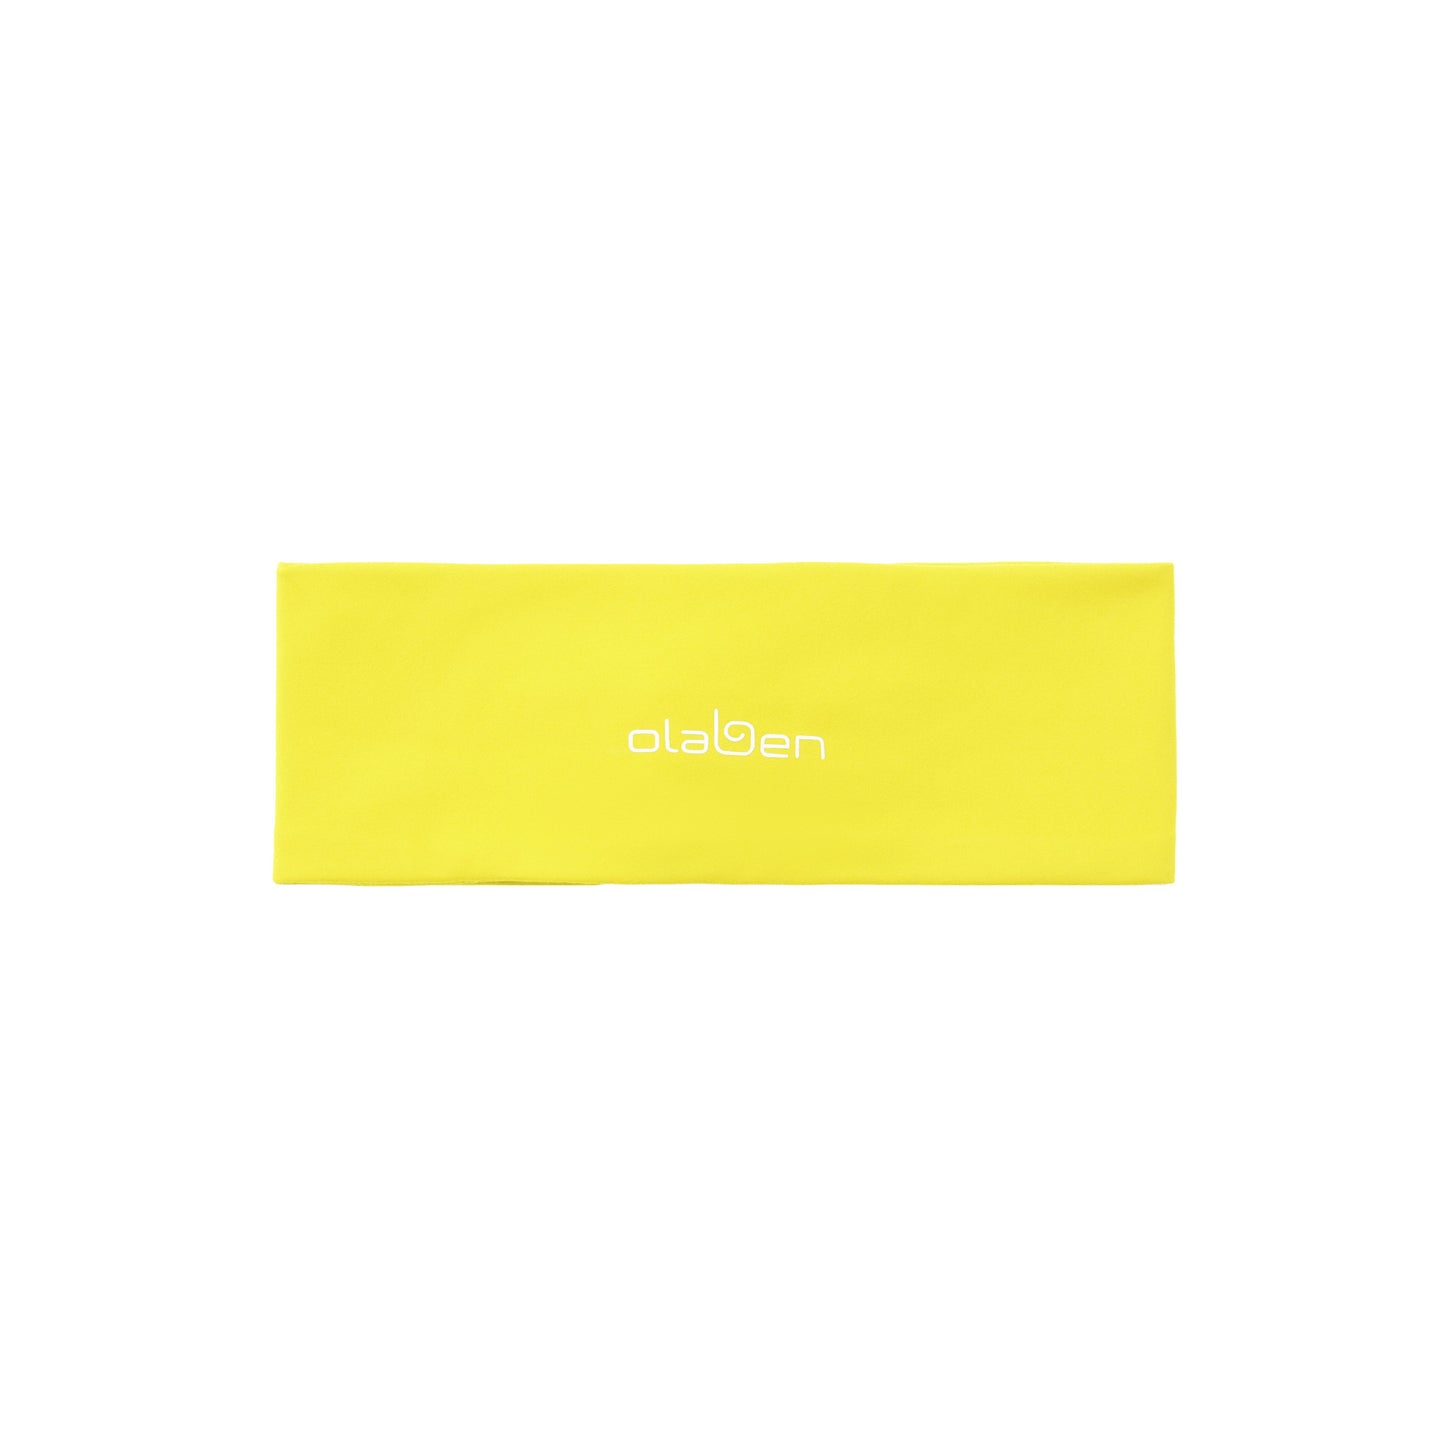 Colorful wild rice yellow headband with OLABEN logo, perfect for adding a stylish touch.